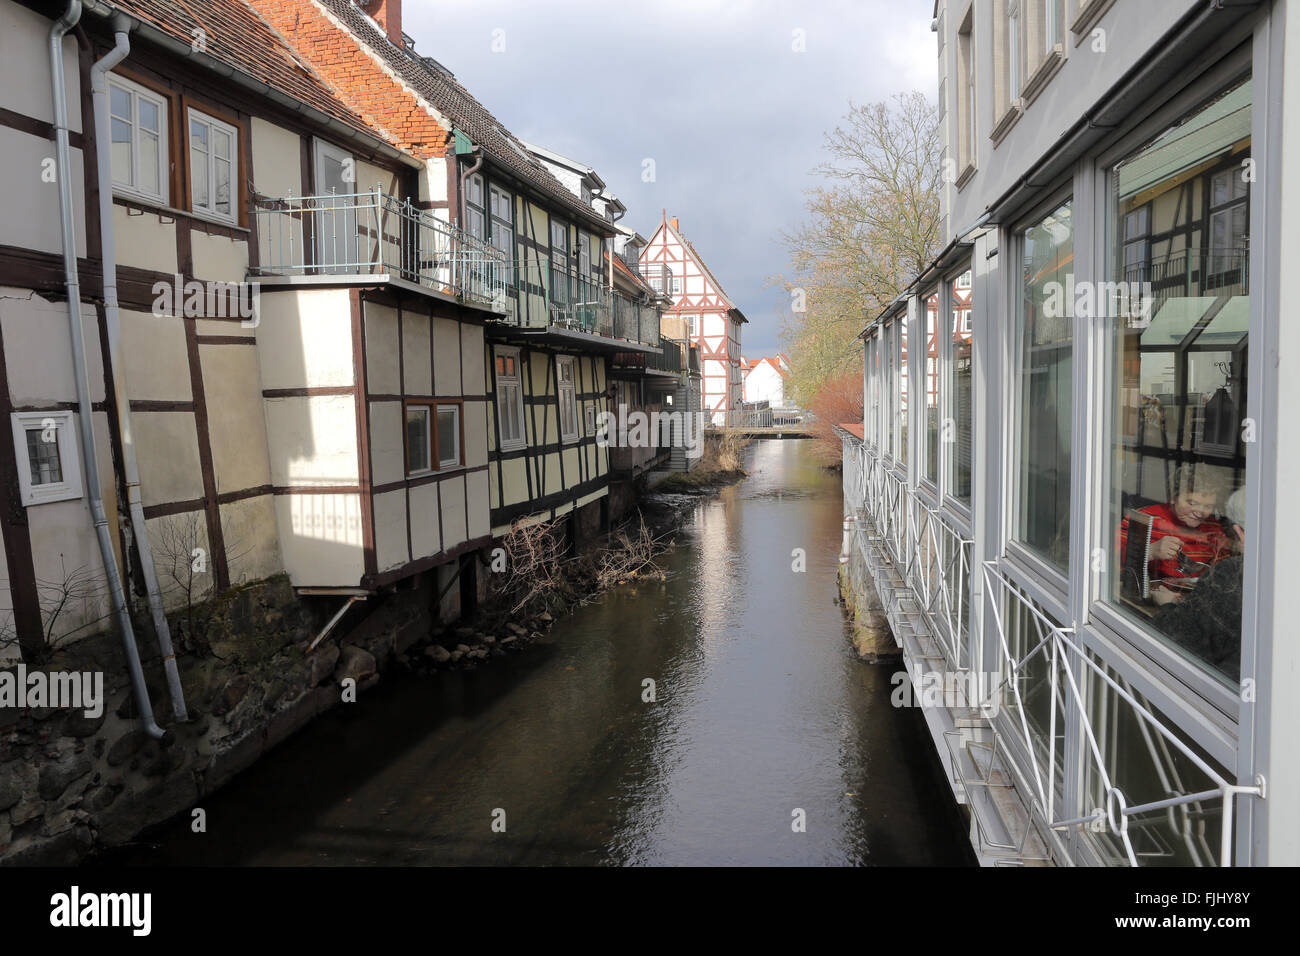 River Jeetze in the old town of Salzwedel, Altmark, Sachsen Anhalt, Germany, Europe Stock Photo